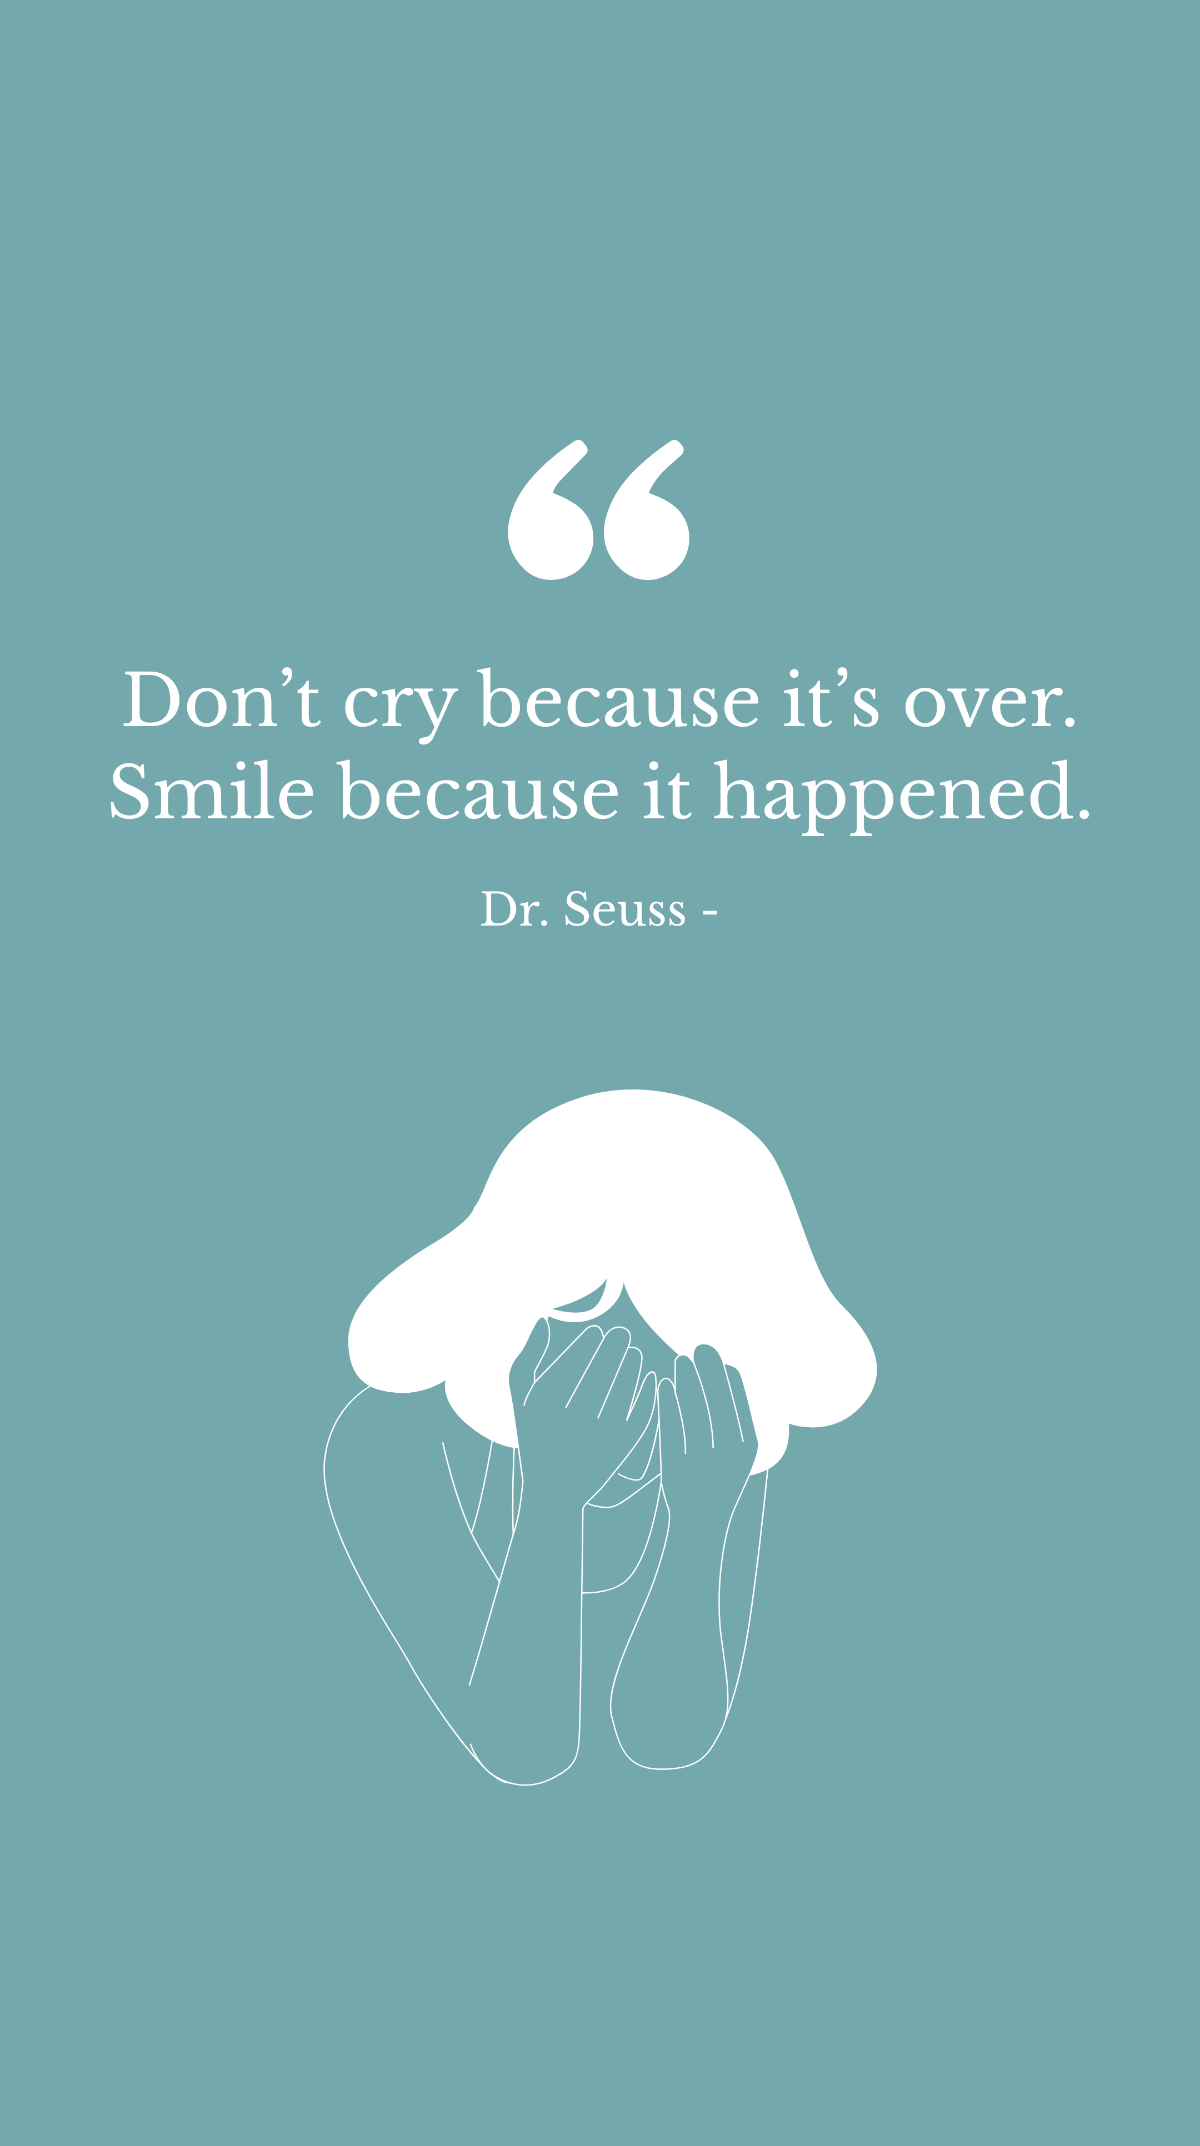 Free Dr. Seuss - Don’t cry because it’s over. Smile because it happened. Template